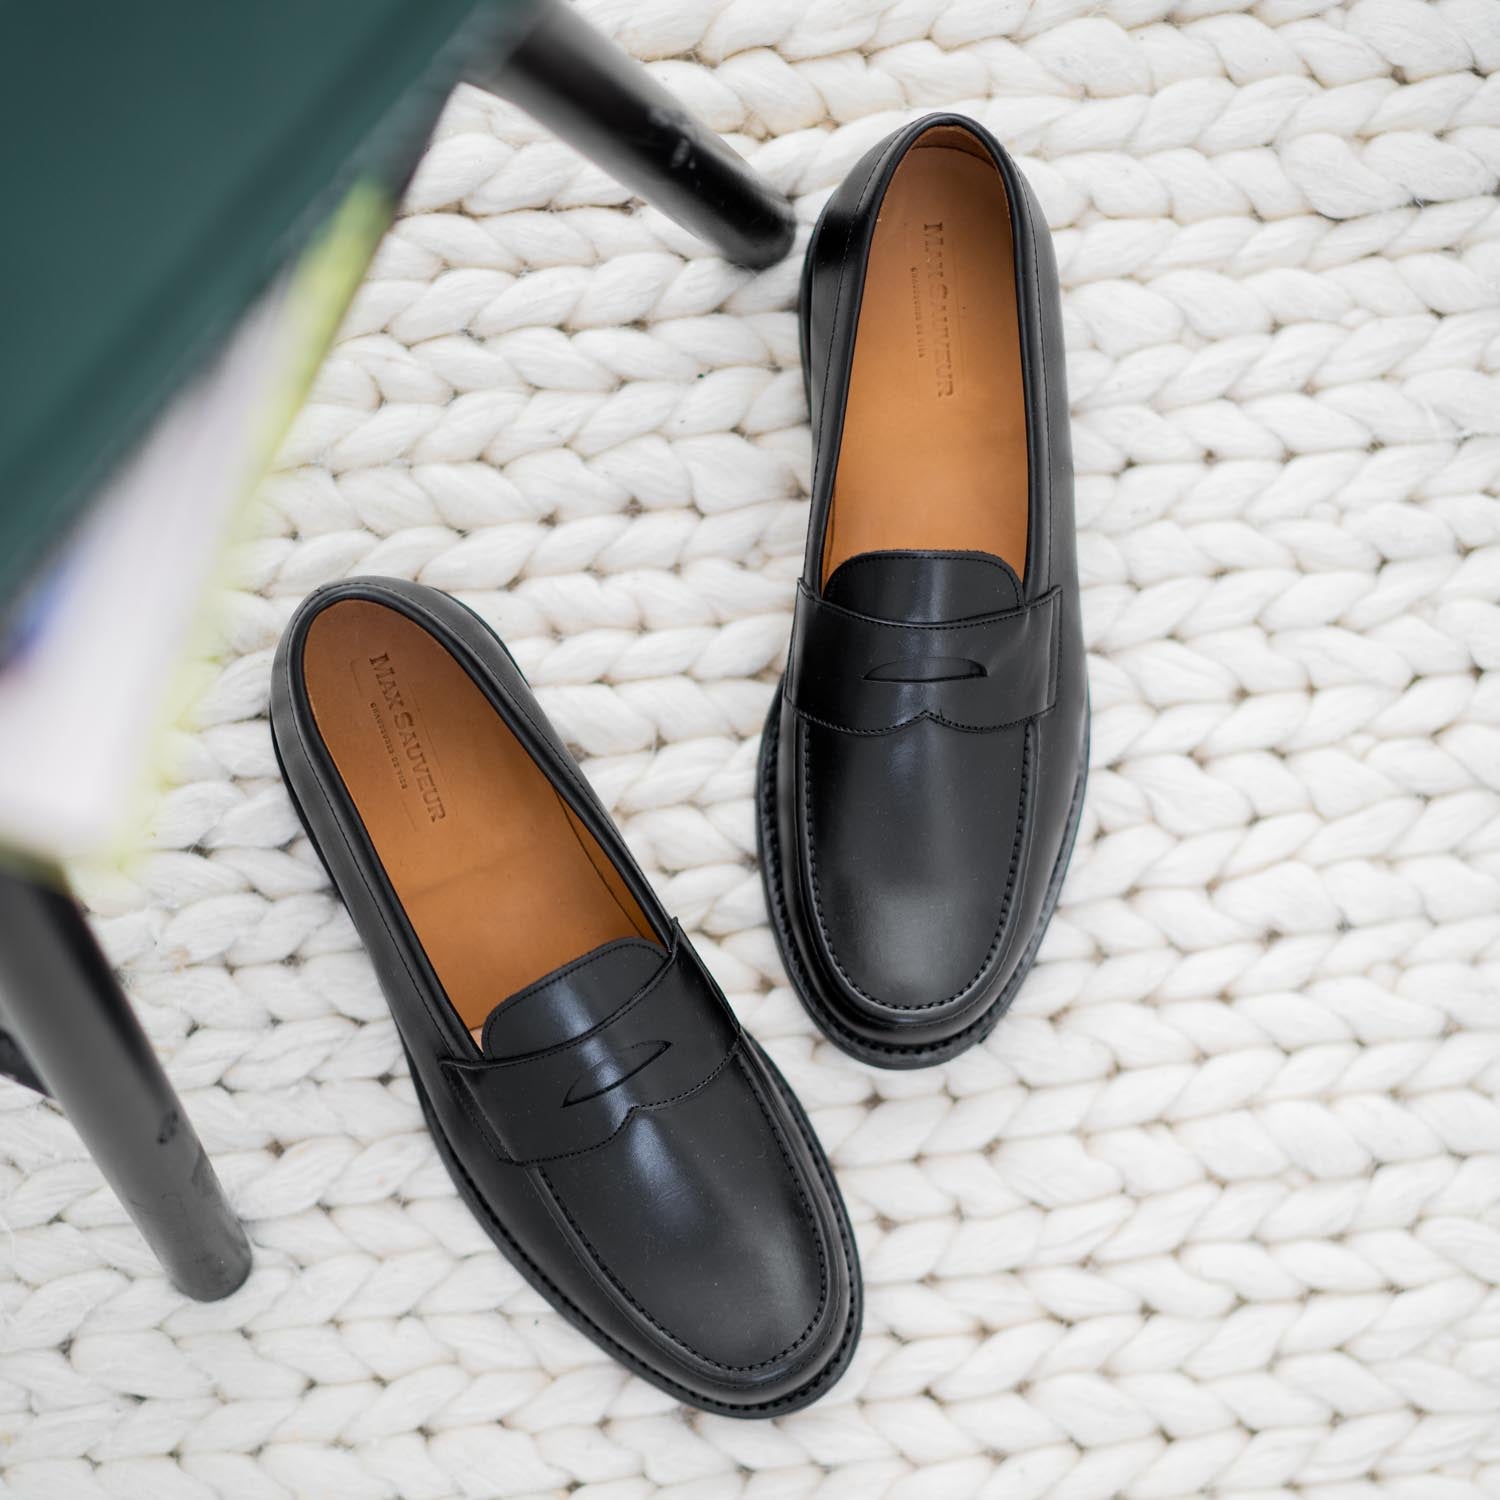 Penny Loafer - Chaussures Mocassin Cuir Noir